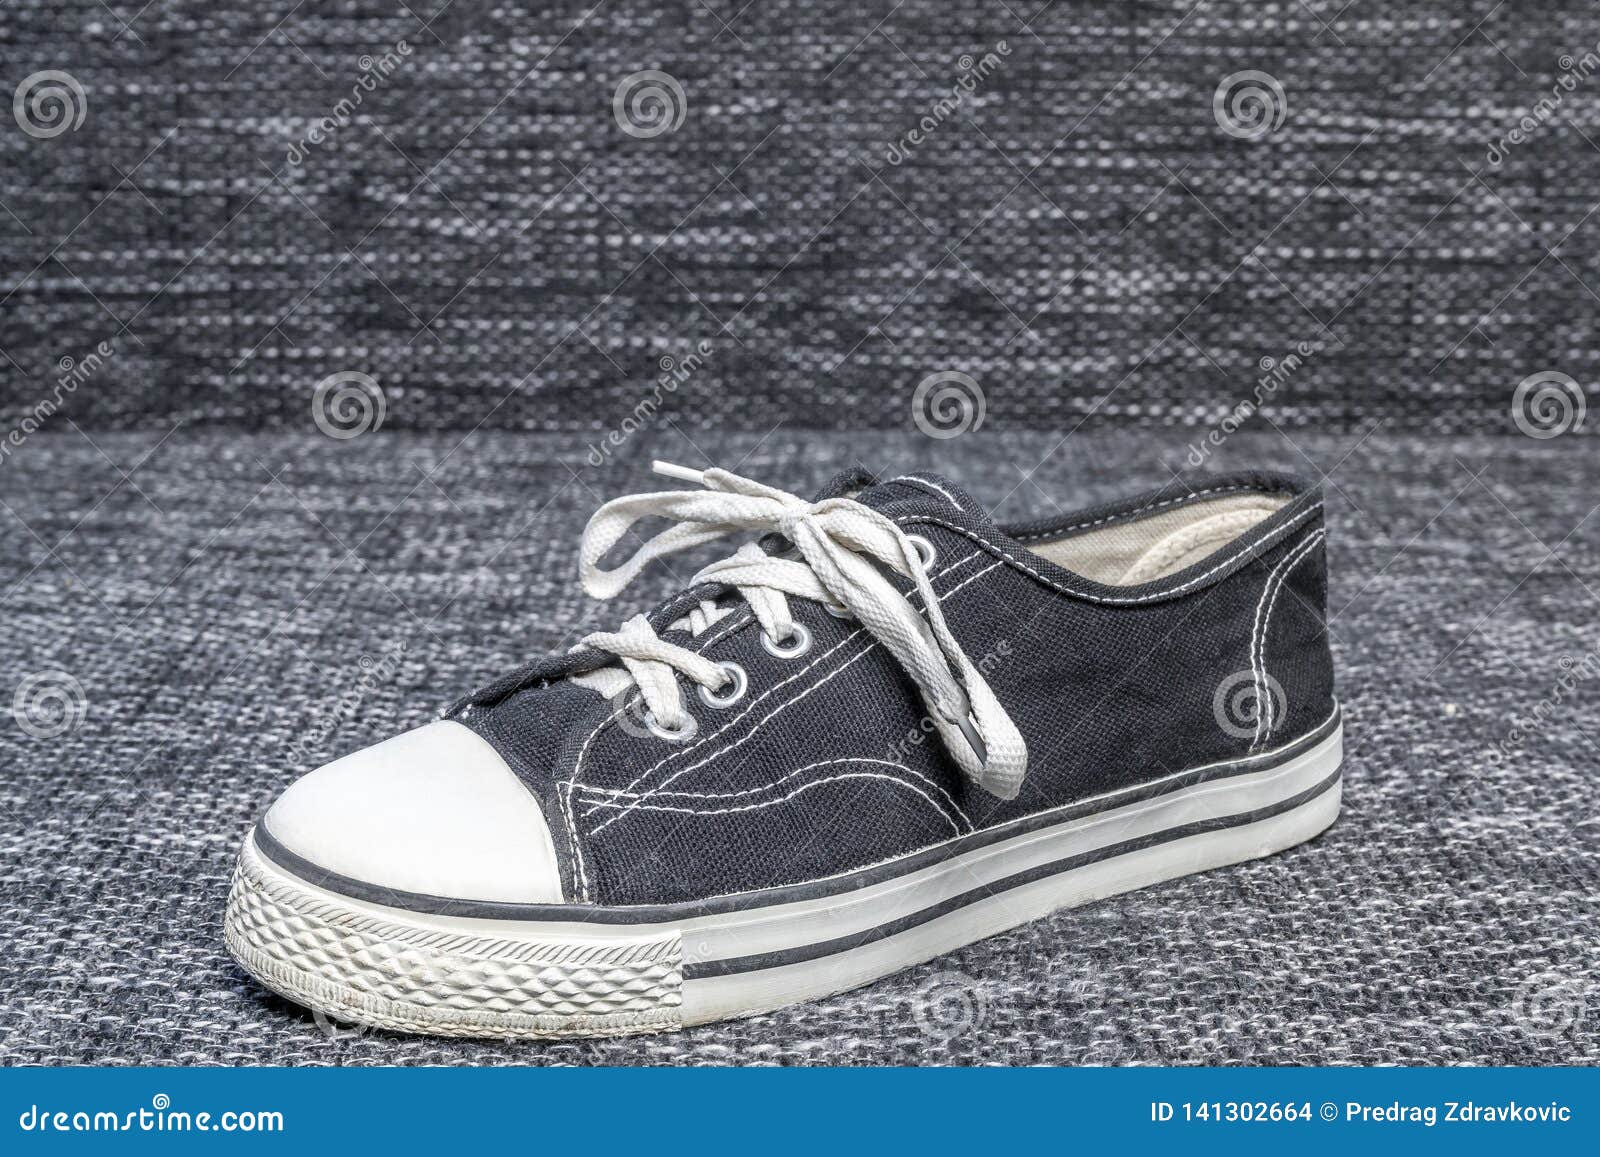 Al Star Shoes are Exposed on a Textile Background Stock Photo - Image ...